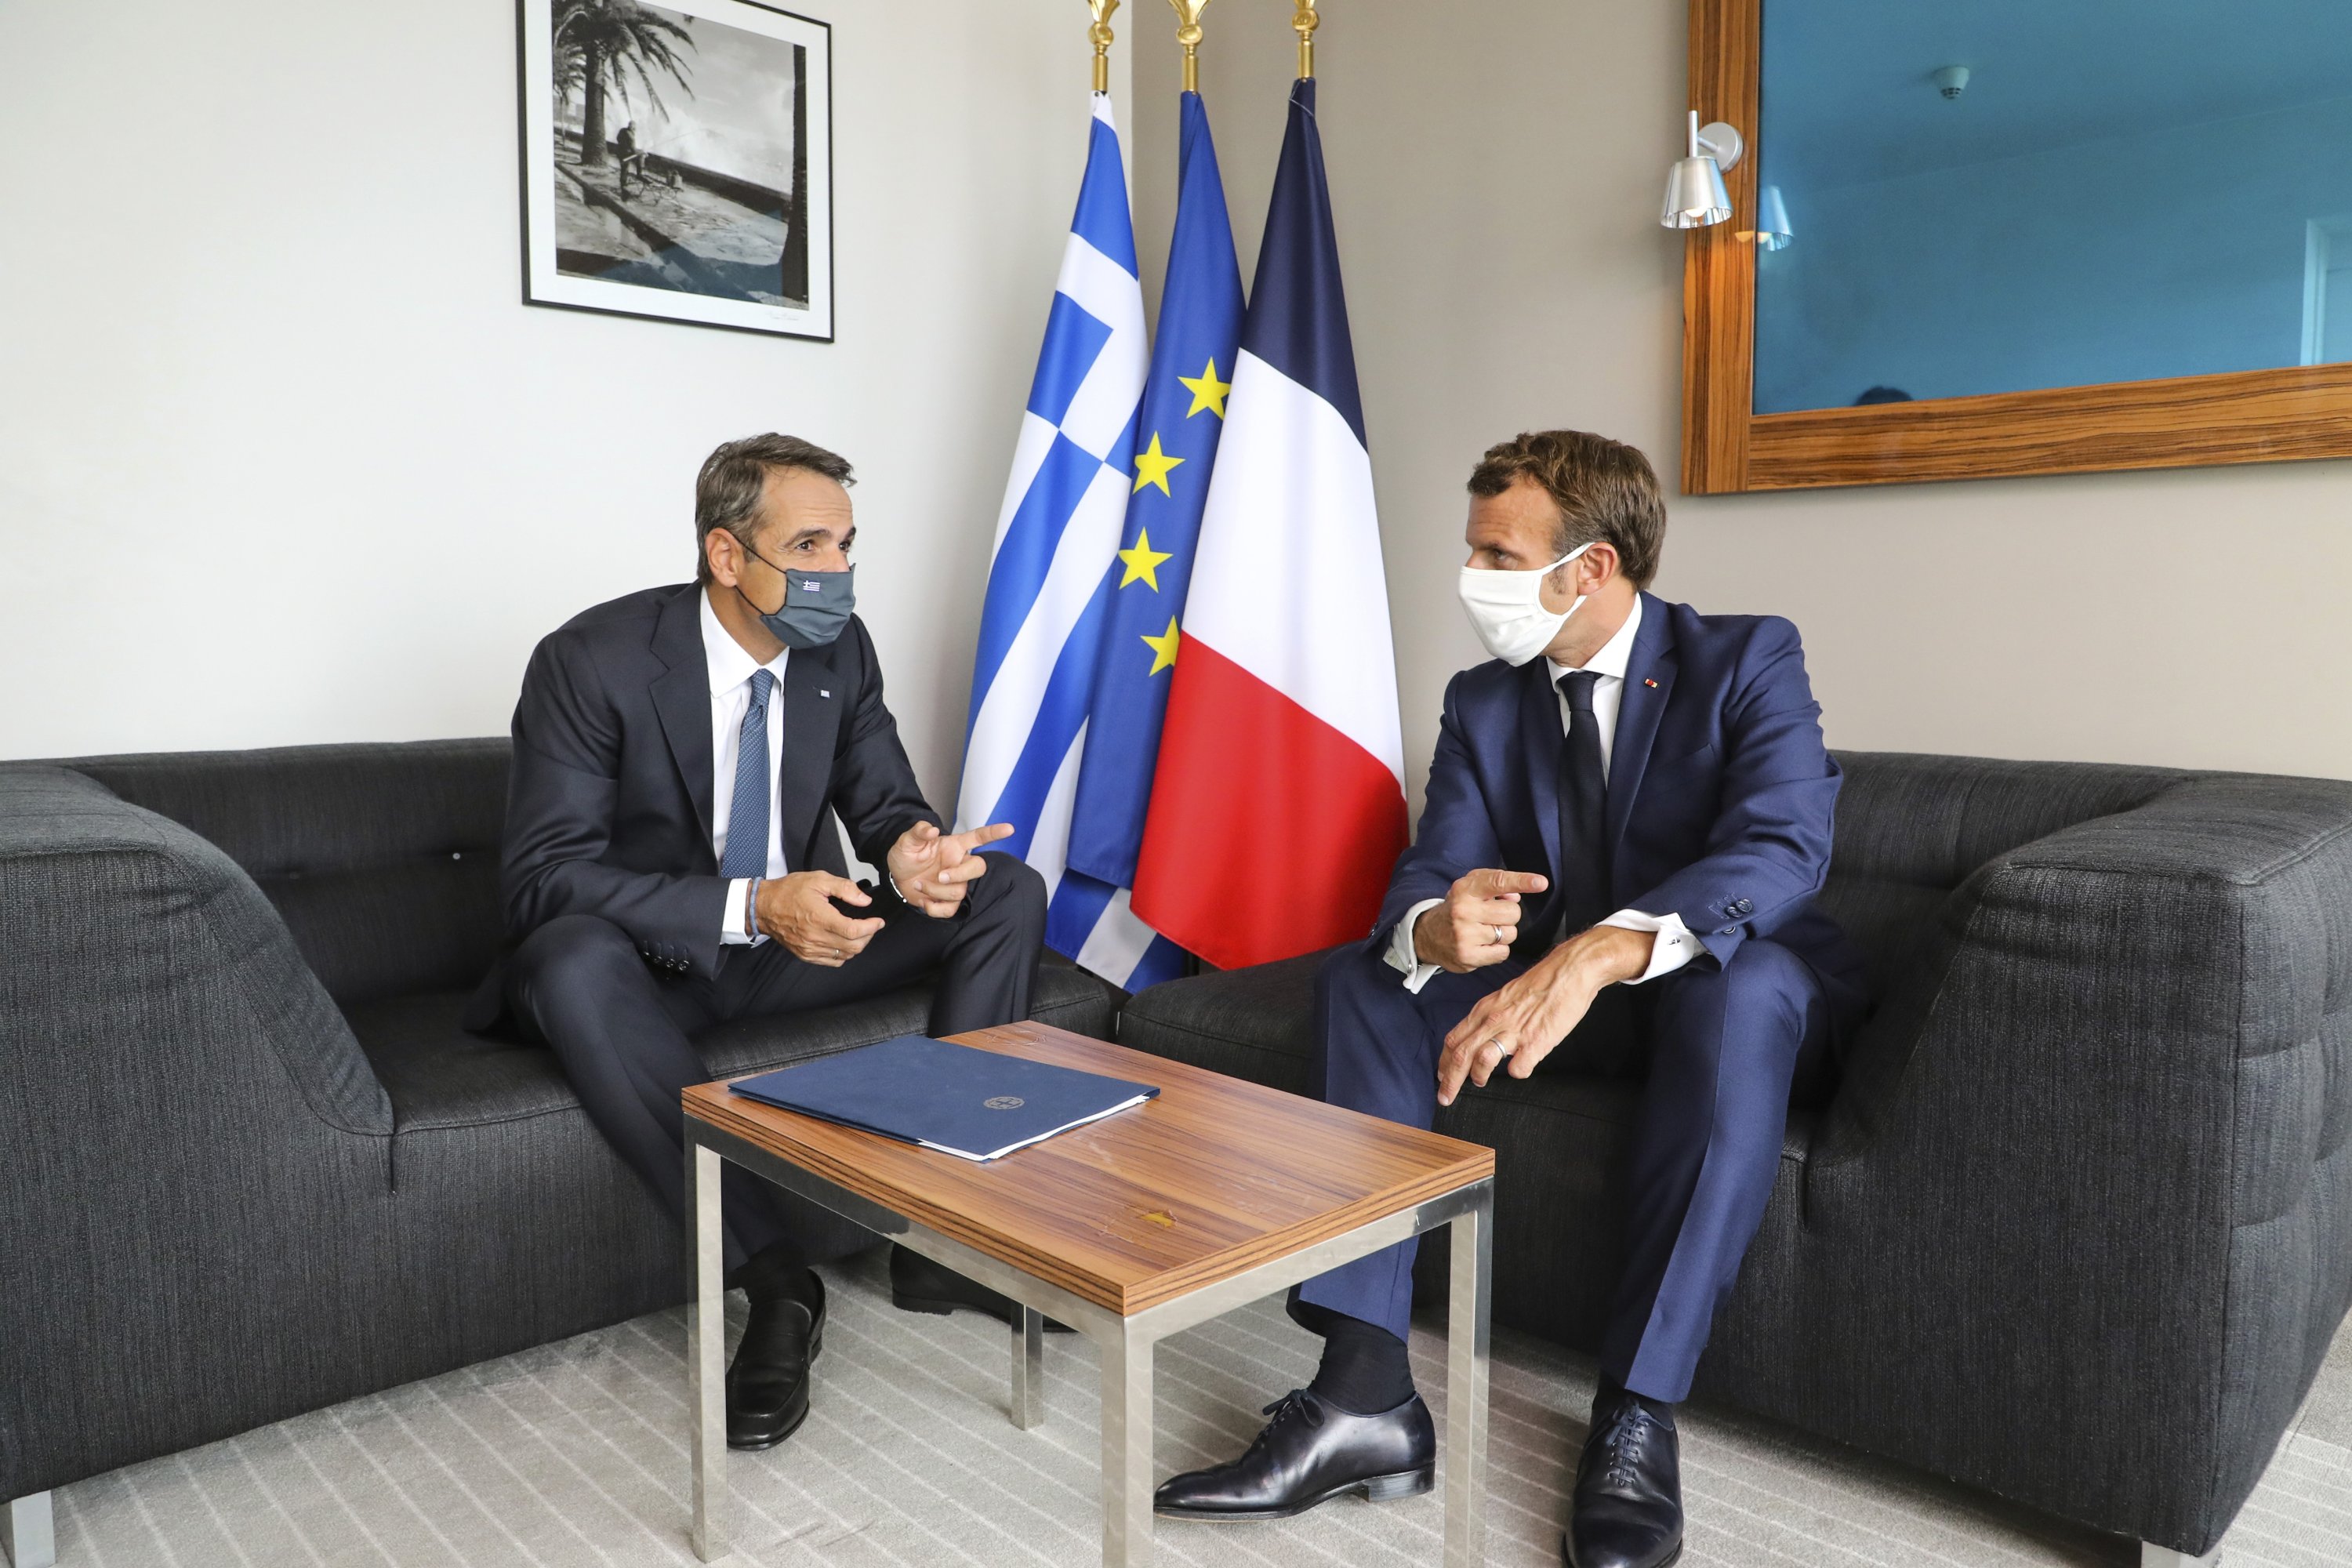 Greek Prime Minister Kyriakos Mitsotakis (L) meets with French President Emmanuel Macron in Porticcio on the French island of Corsica, Sept. 10, 2020. (AP Photo)